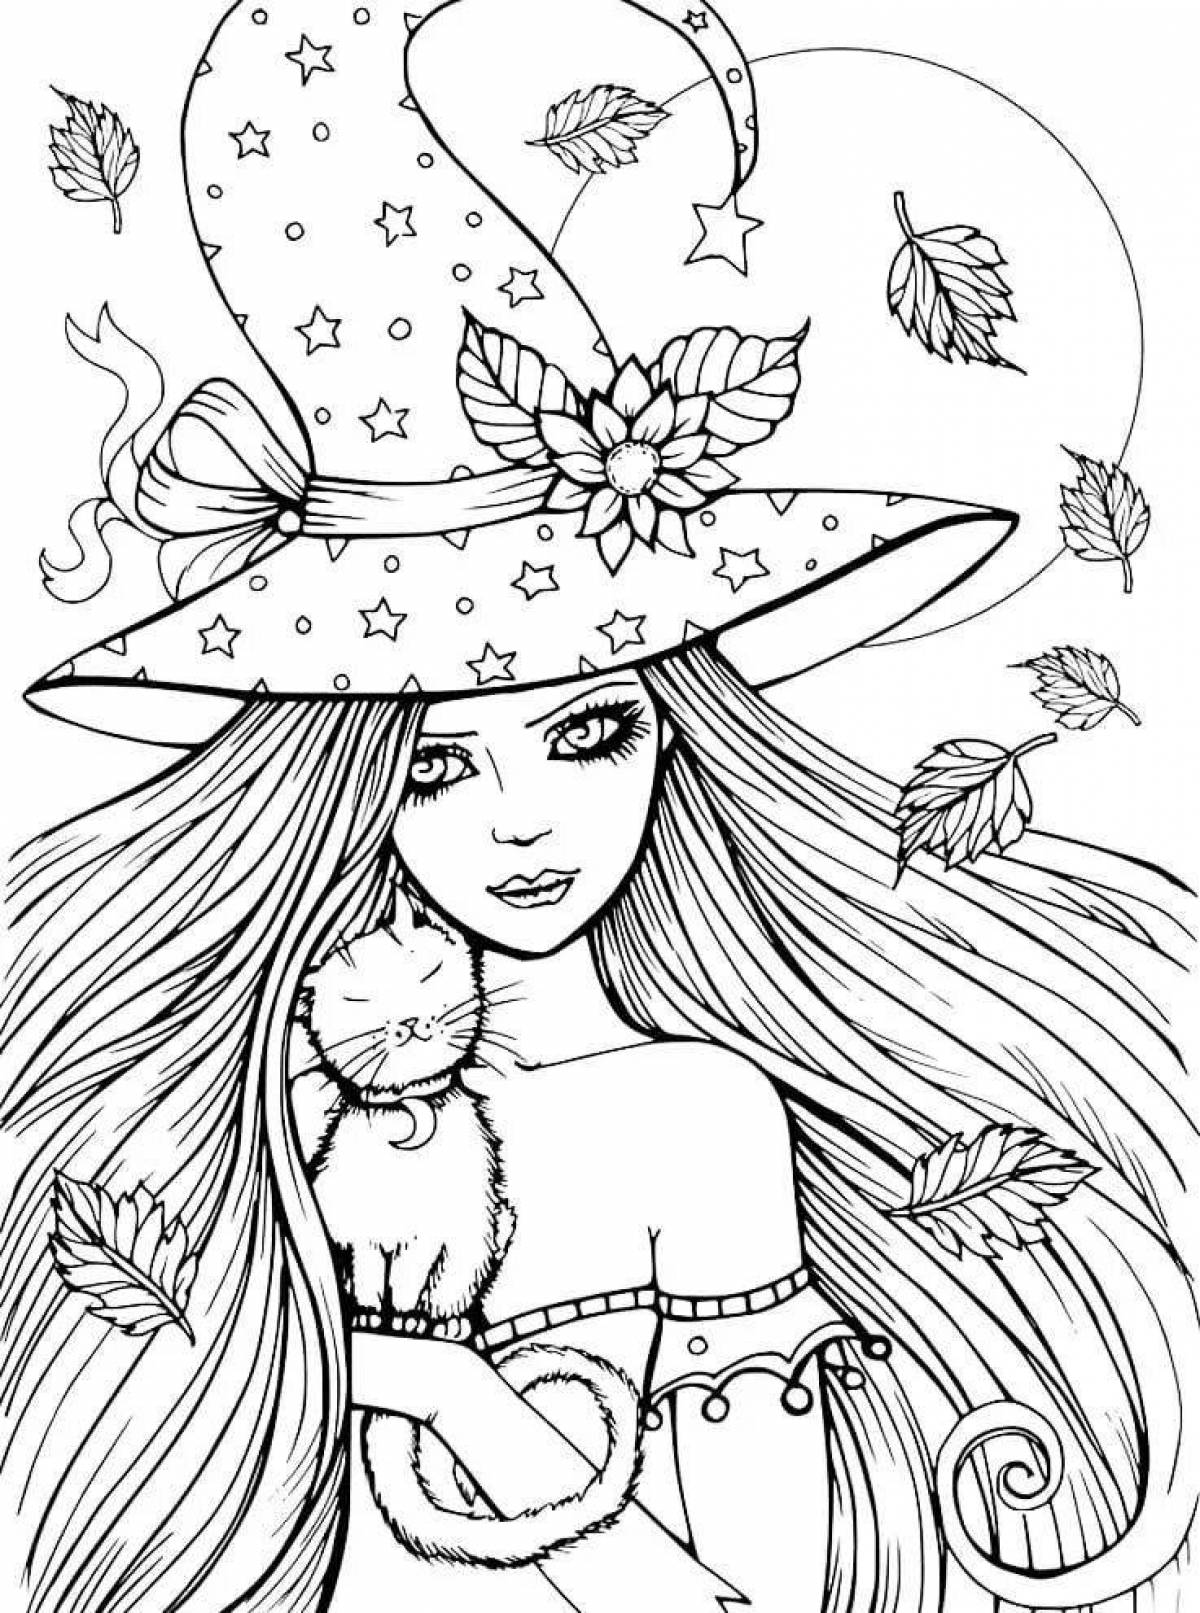 Impressive coloring book for girls 14 years old